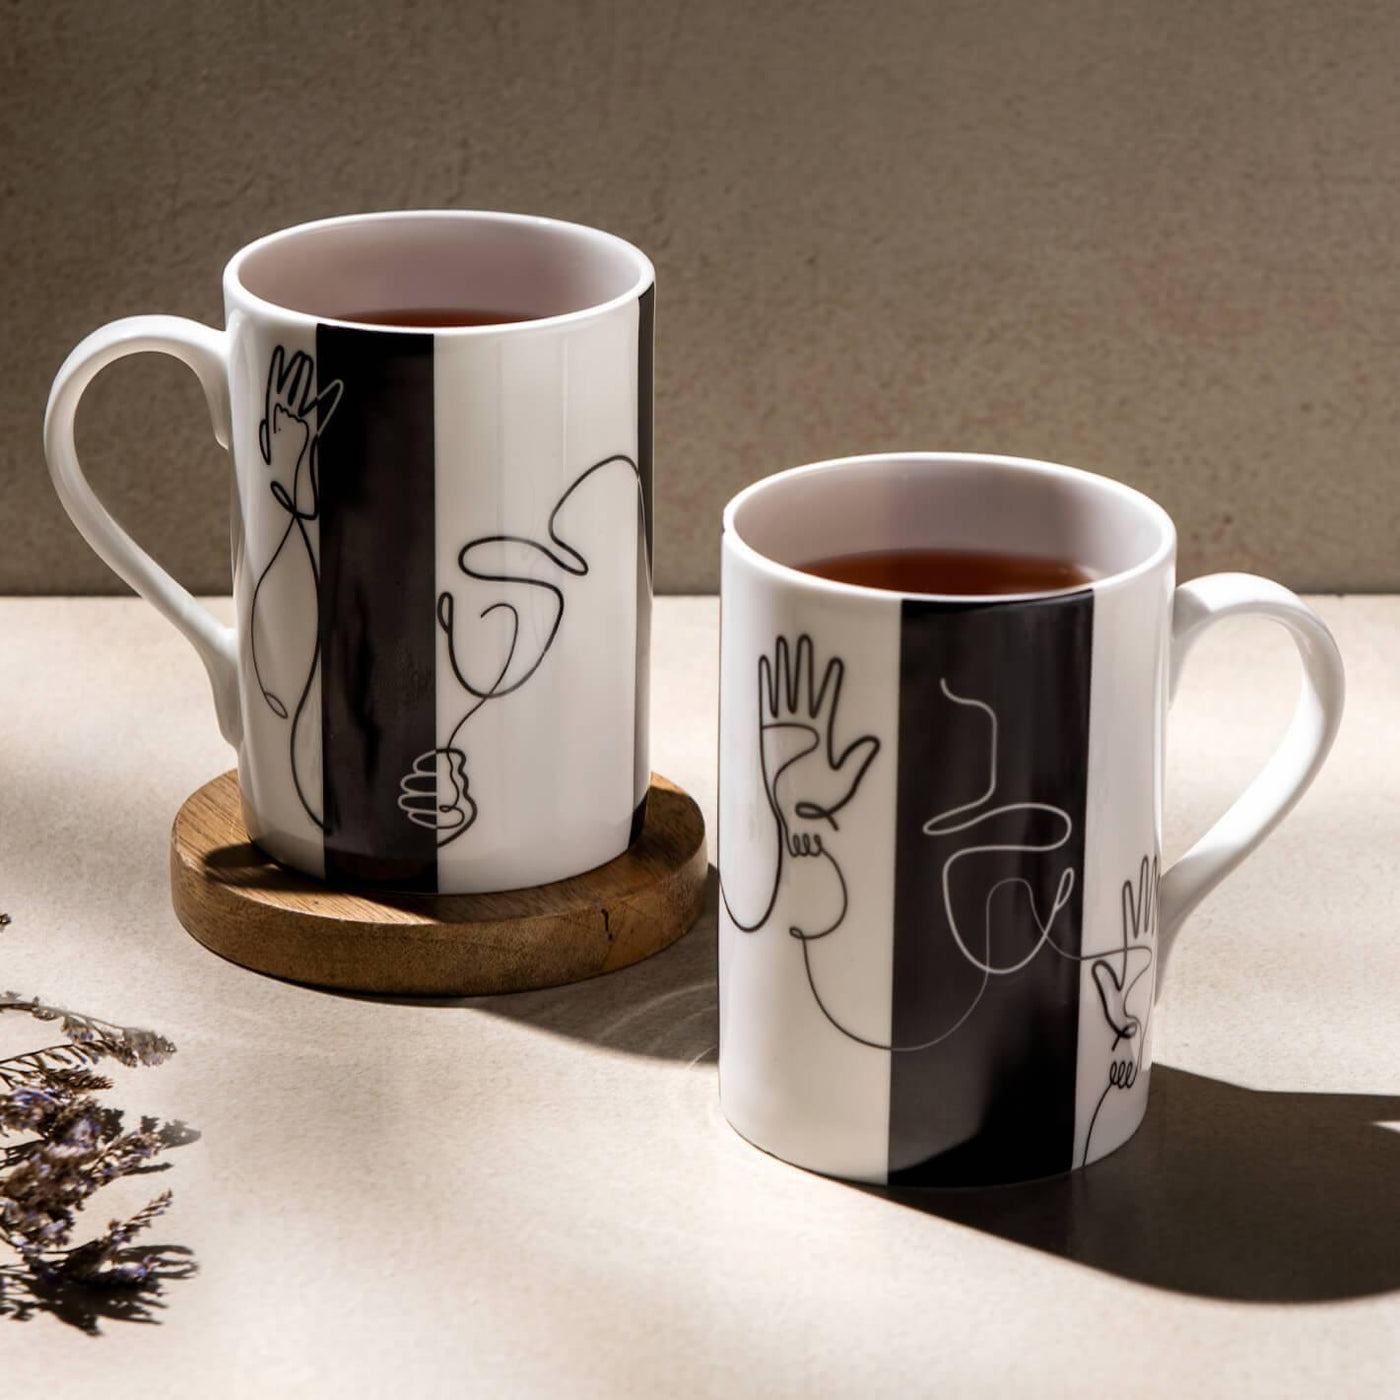 Hide & Seek mugs (set of 2) - The Plated Project